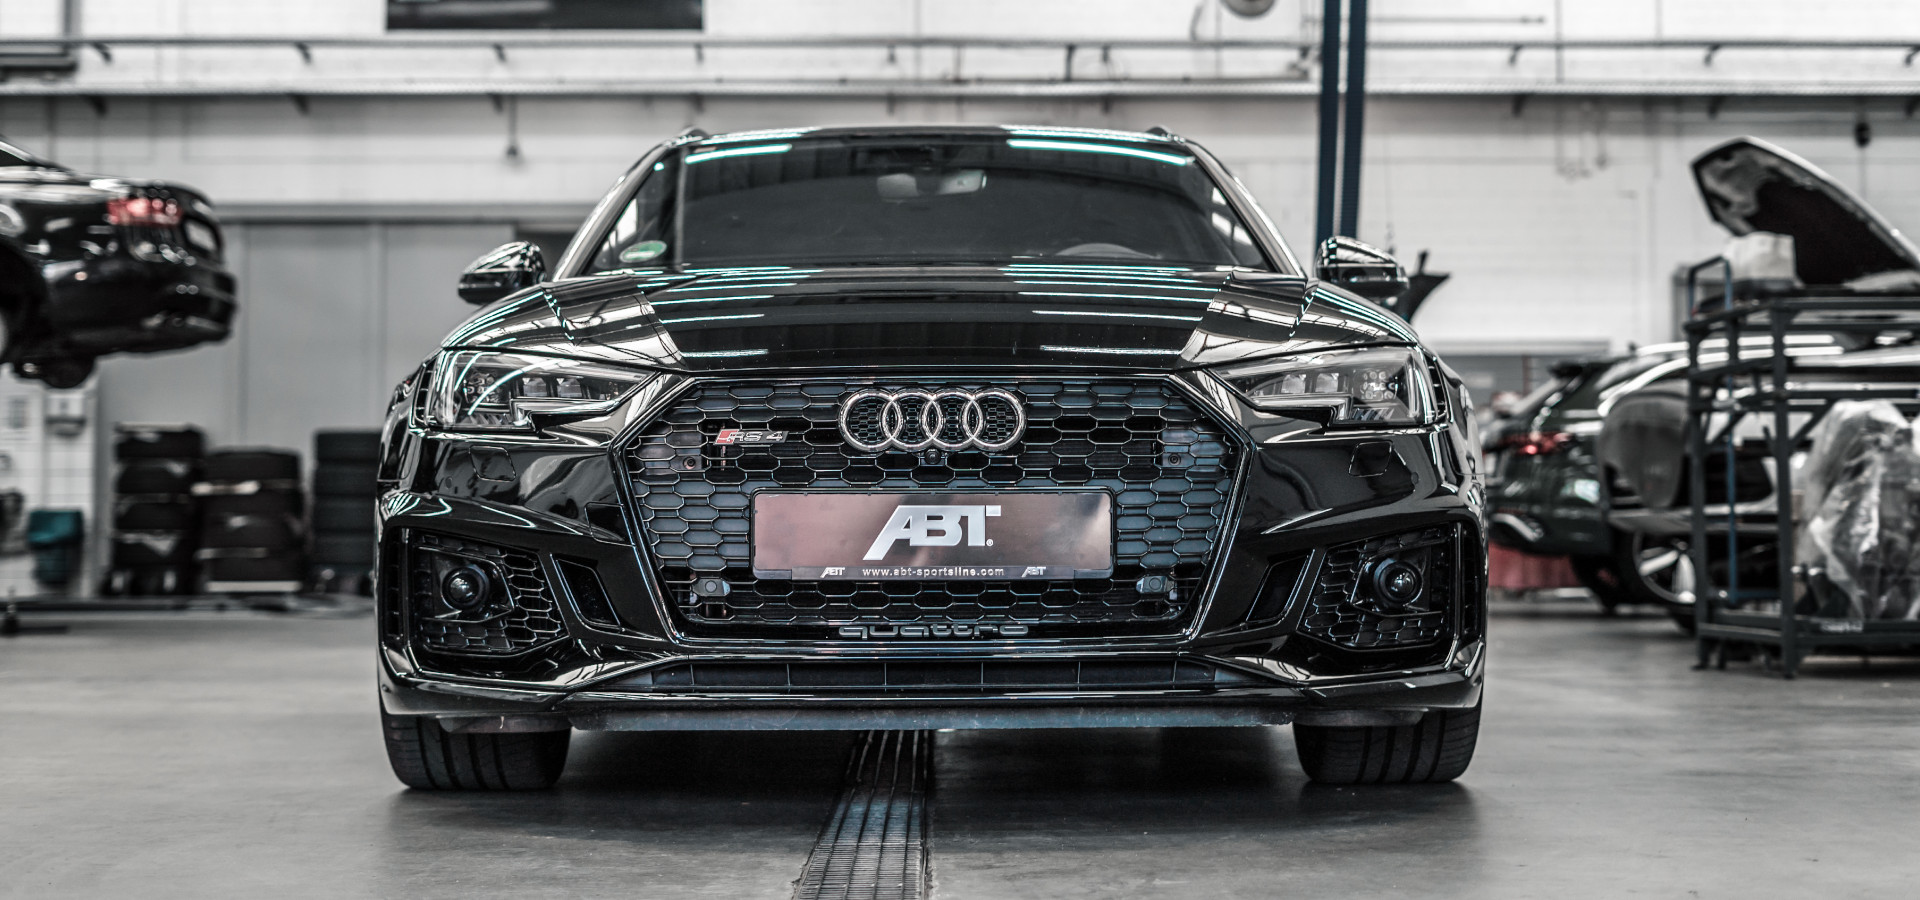 Can Audi Performance Tuning Void The Warranty?